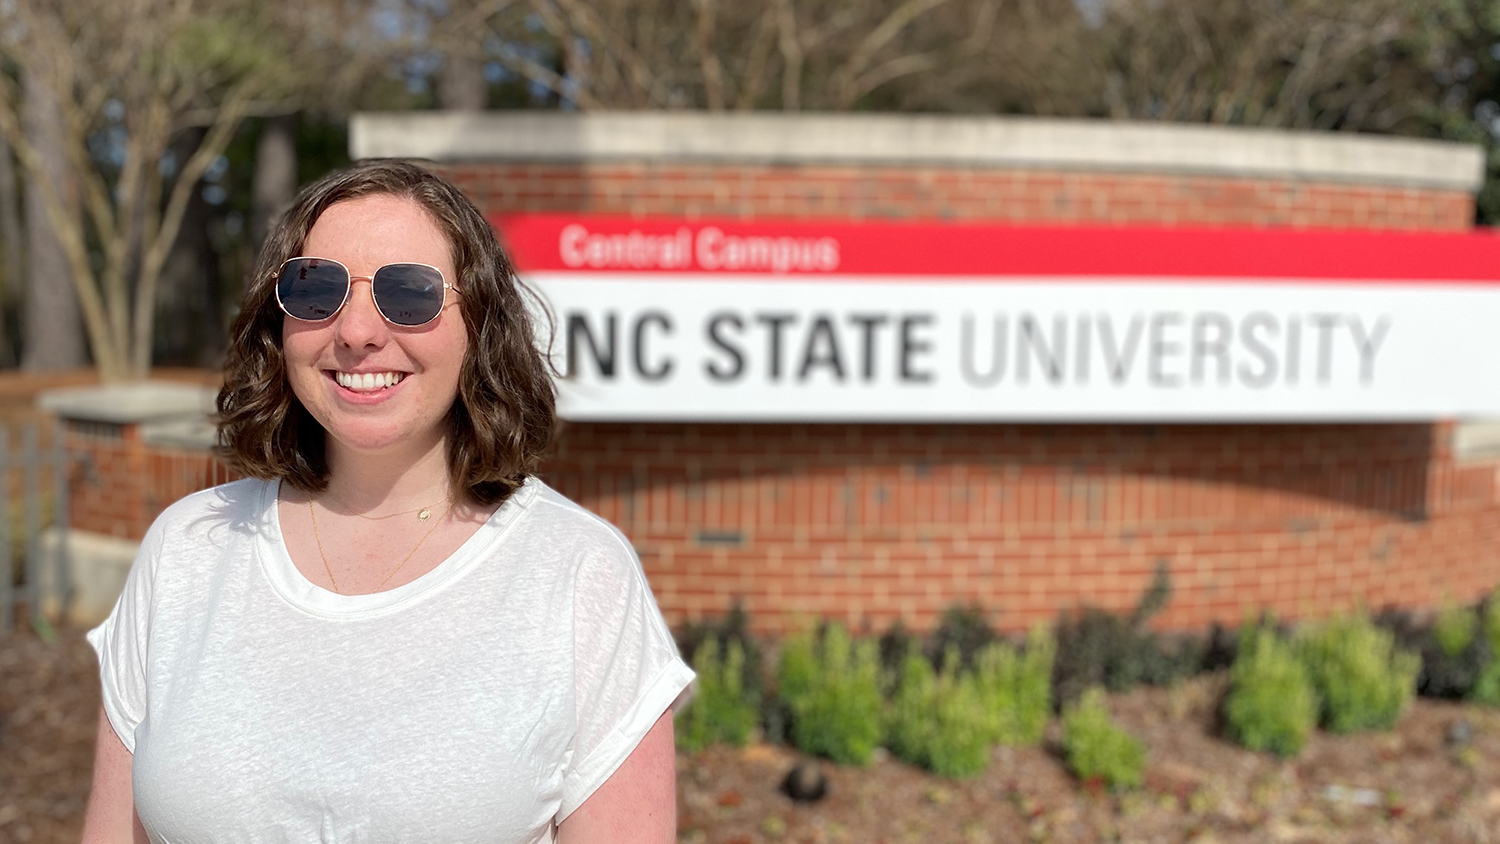 Shannon McAvoy stands in front of an NC State University sign